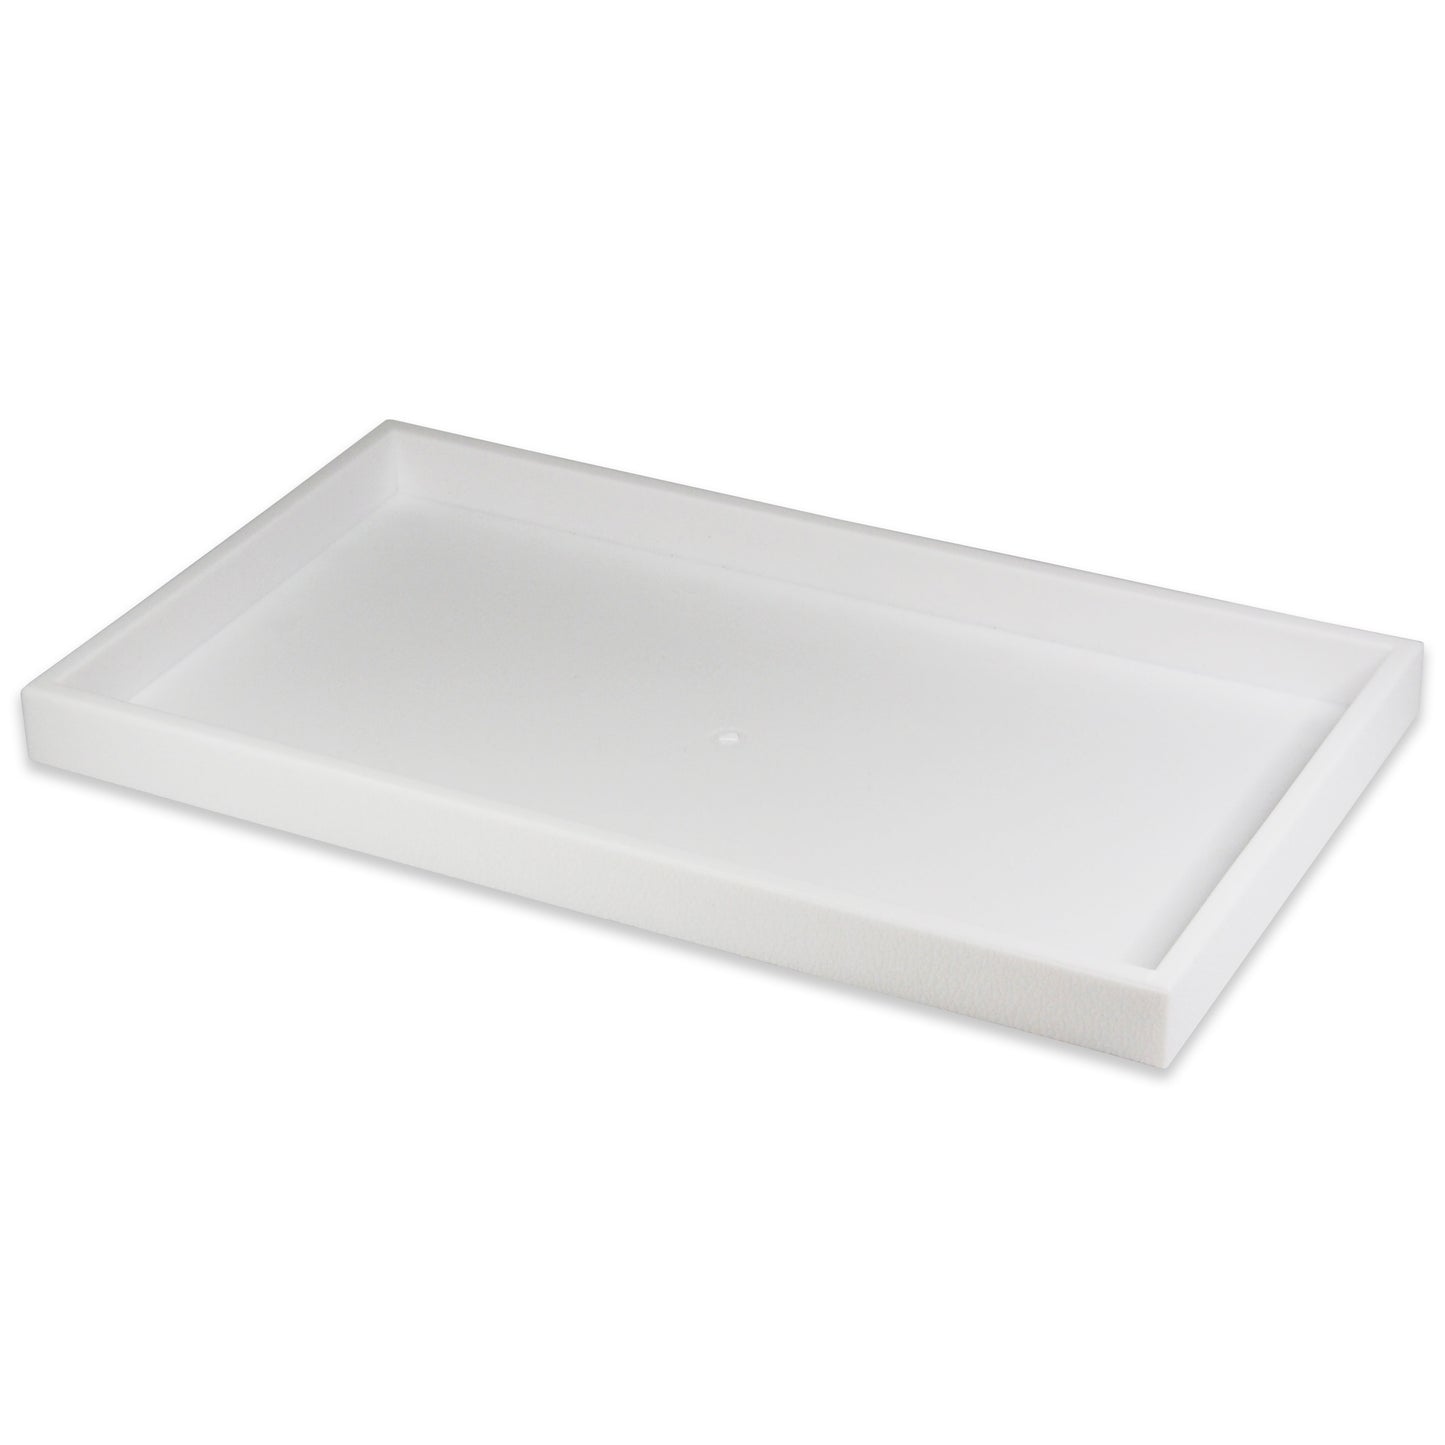 White 1"H Standard Stackable Plastic Utility Trays - 14 3/4'' x 8 1/4'' x 1''H